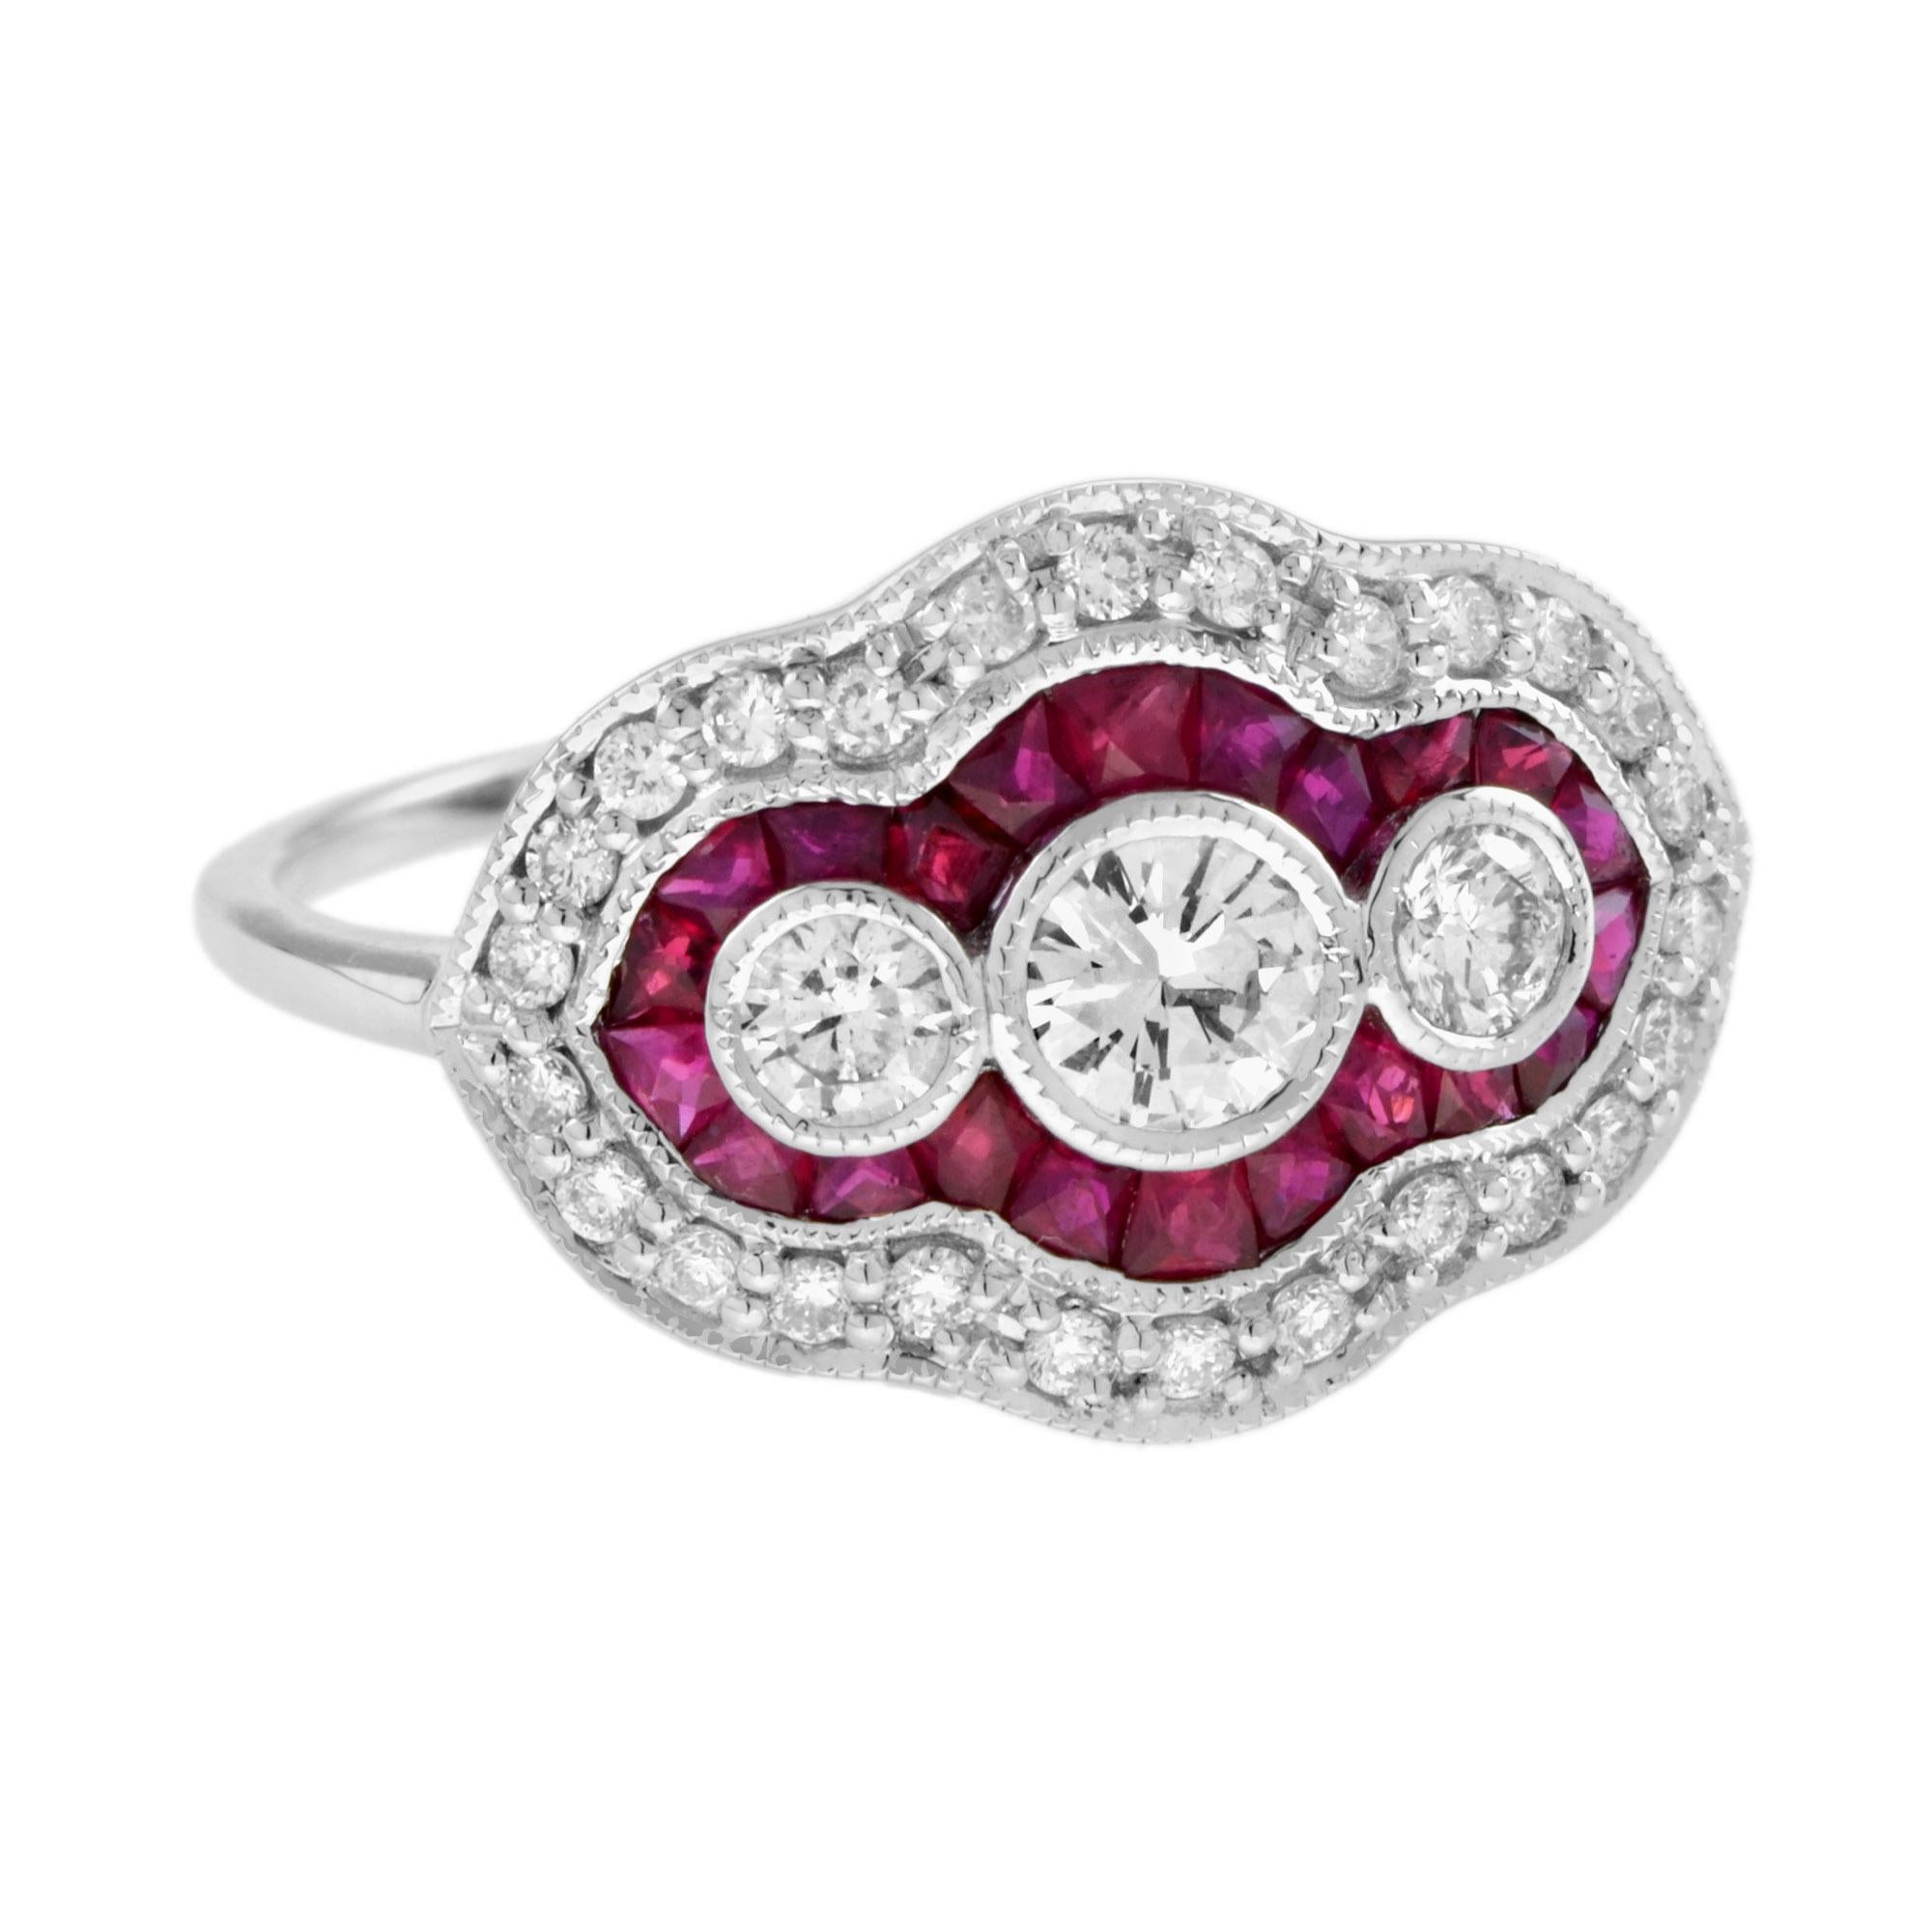 Made entirely of white gold, this stunning Art Deco inspired ring is elegant and timeless. Three round diamonds form the center of the ring’s top, and they’re enveloped by a group of French cut rubies. The rest of the ring is prepared with diamonds